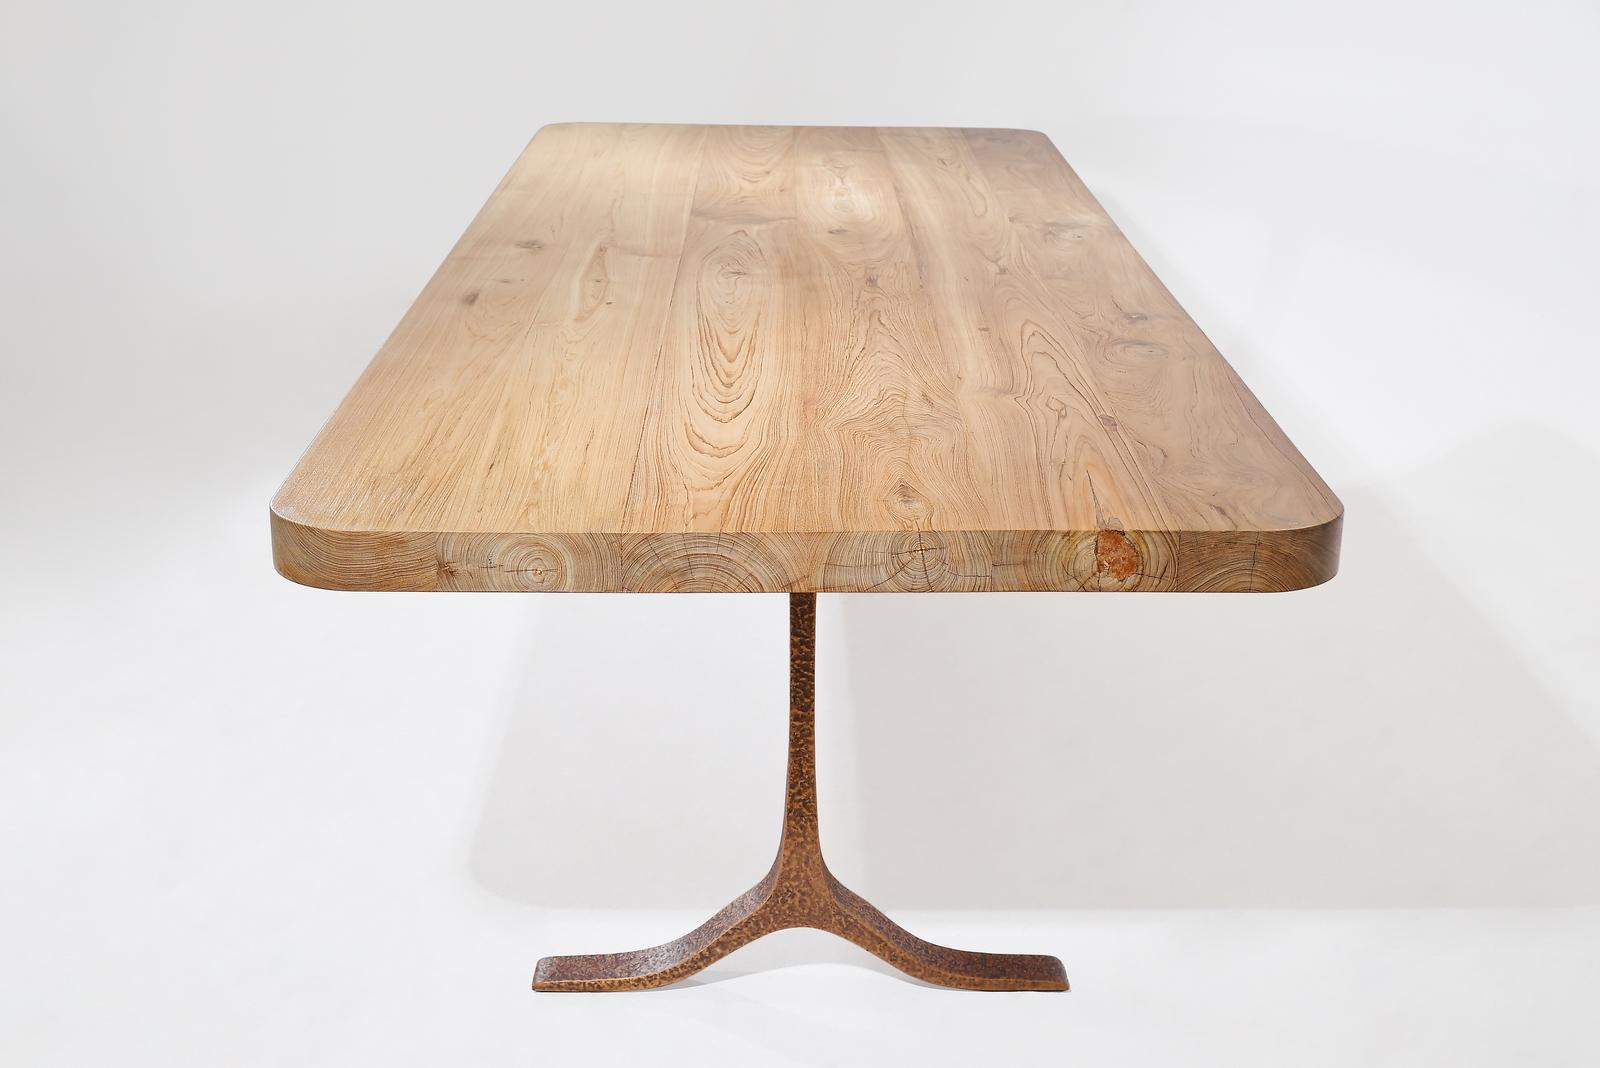 Thai Bespoke Dining Table, Reclaimed Wood, Sand Cast Bronze Base, by P. Tendercool For Sale